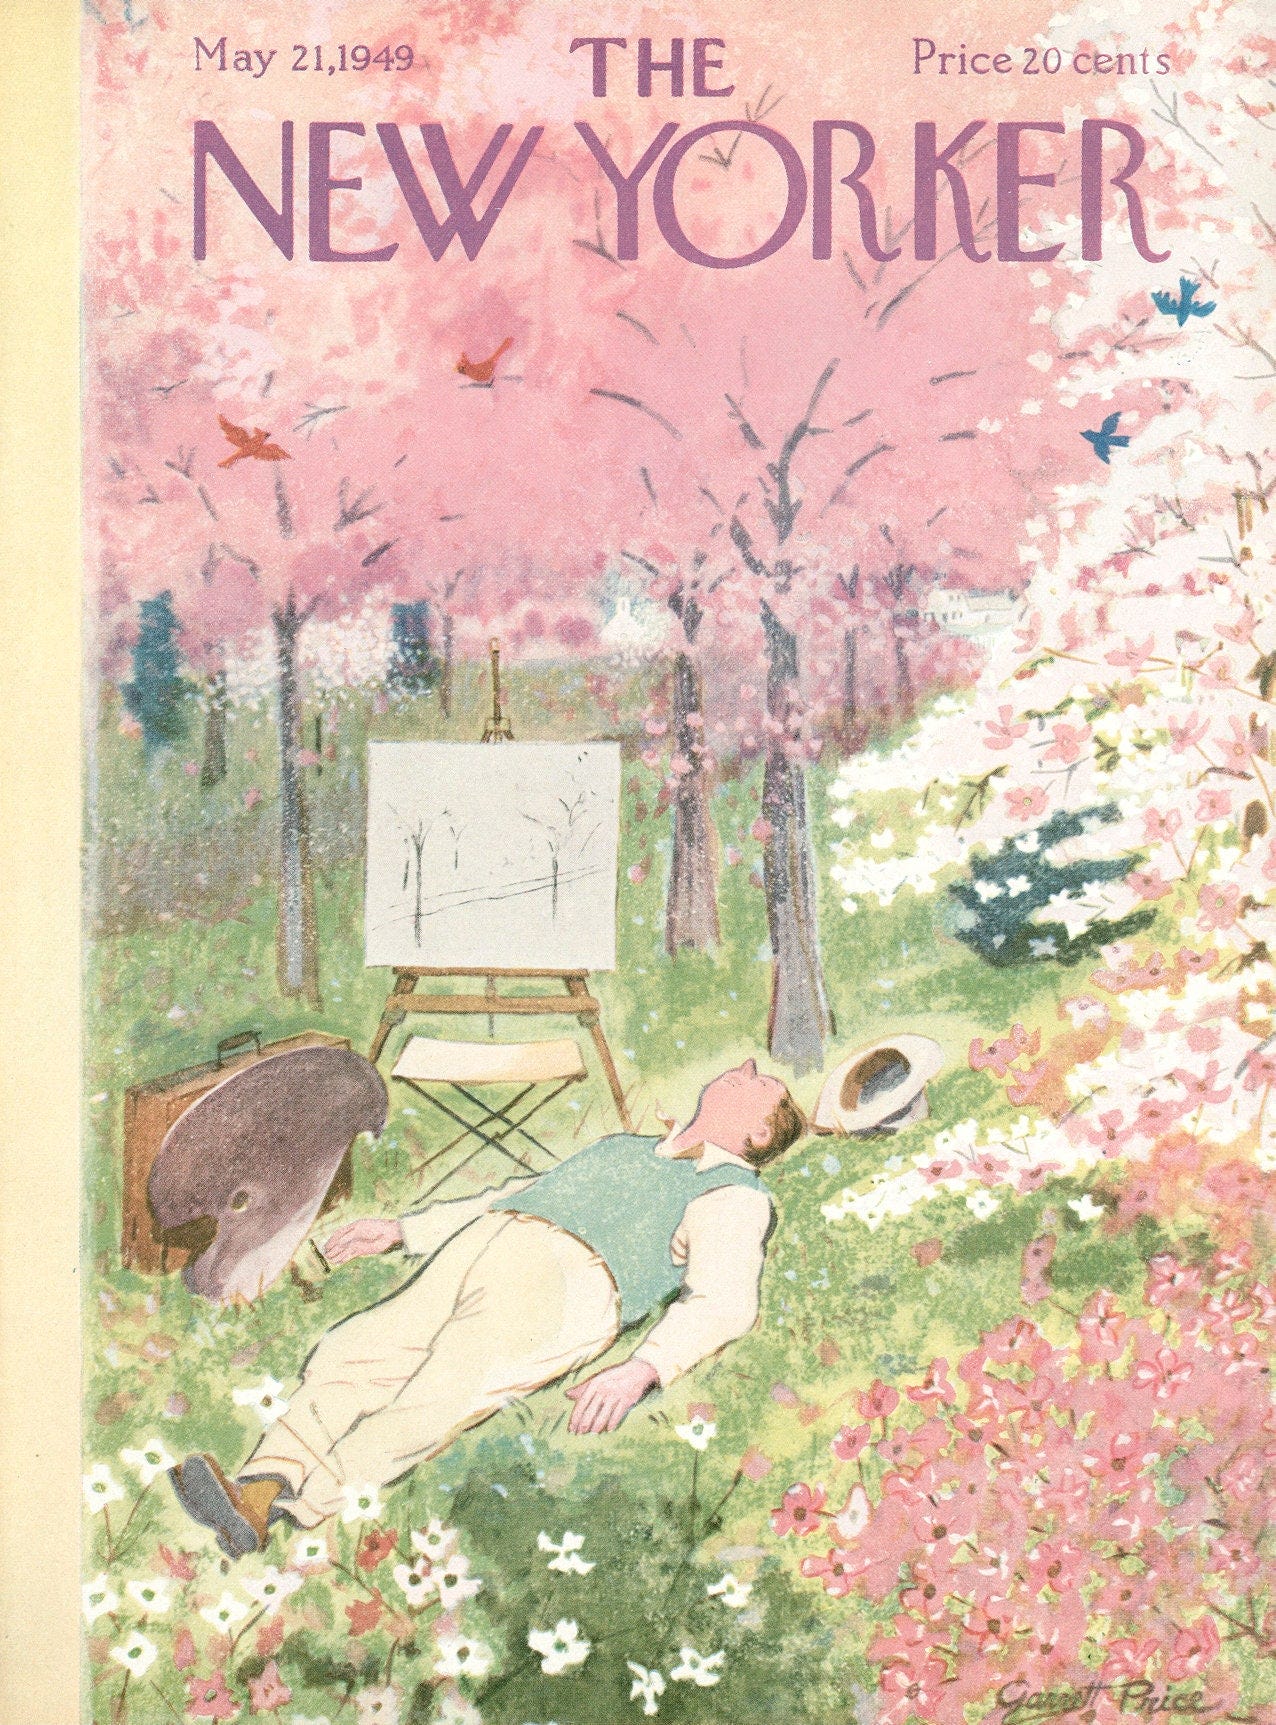 The New Yorker May 21, 1949 Issue | The New Yorker